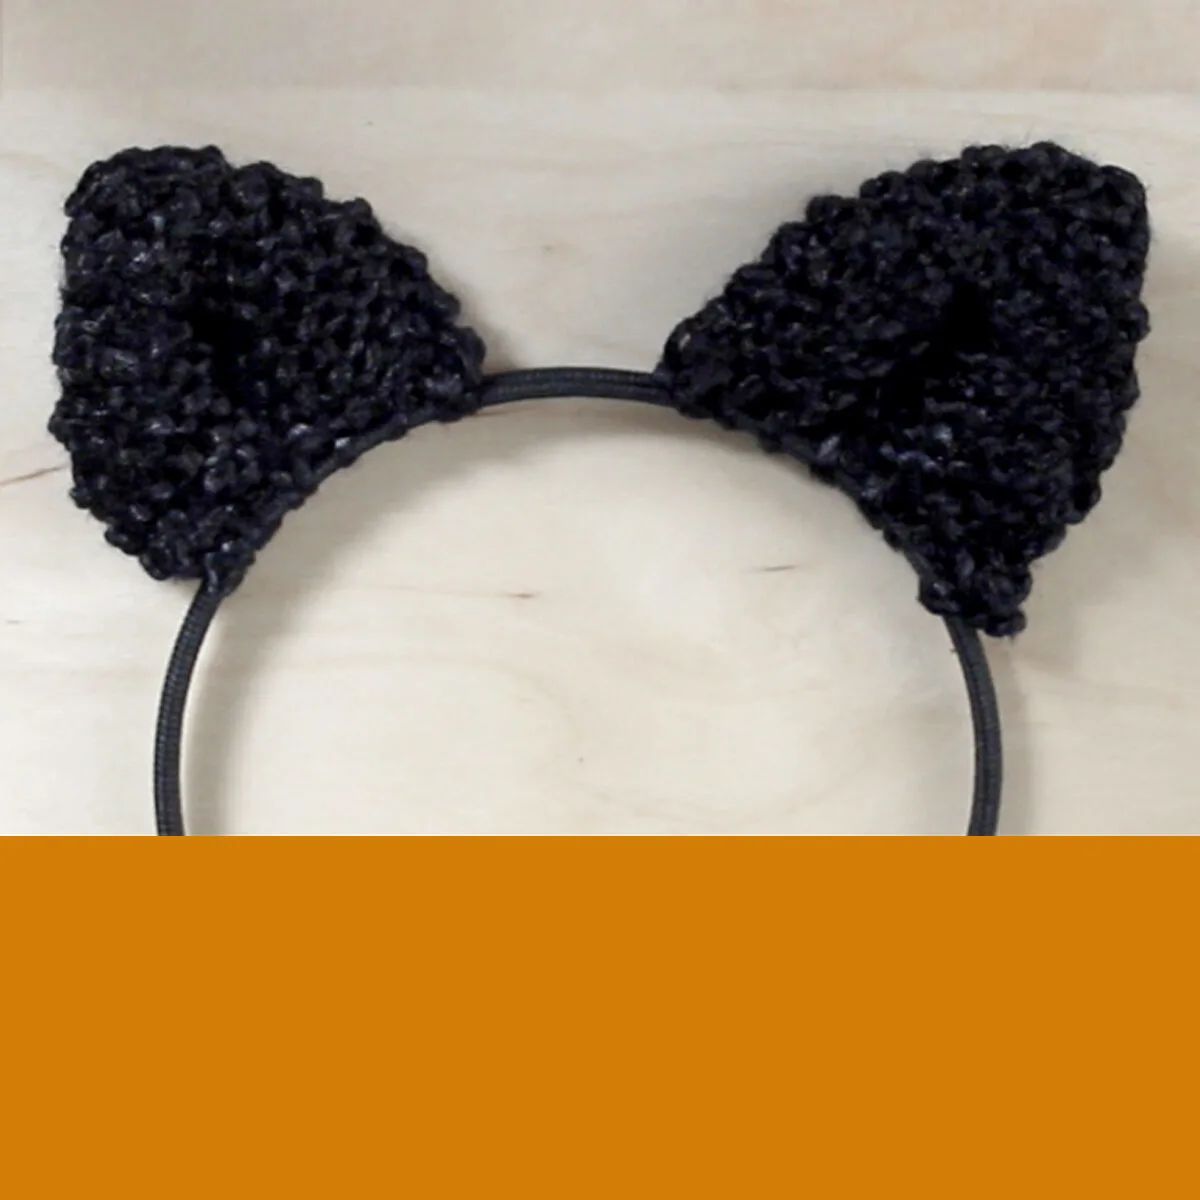 Knitted Cat Ears on a headband in black color yarn.